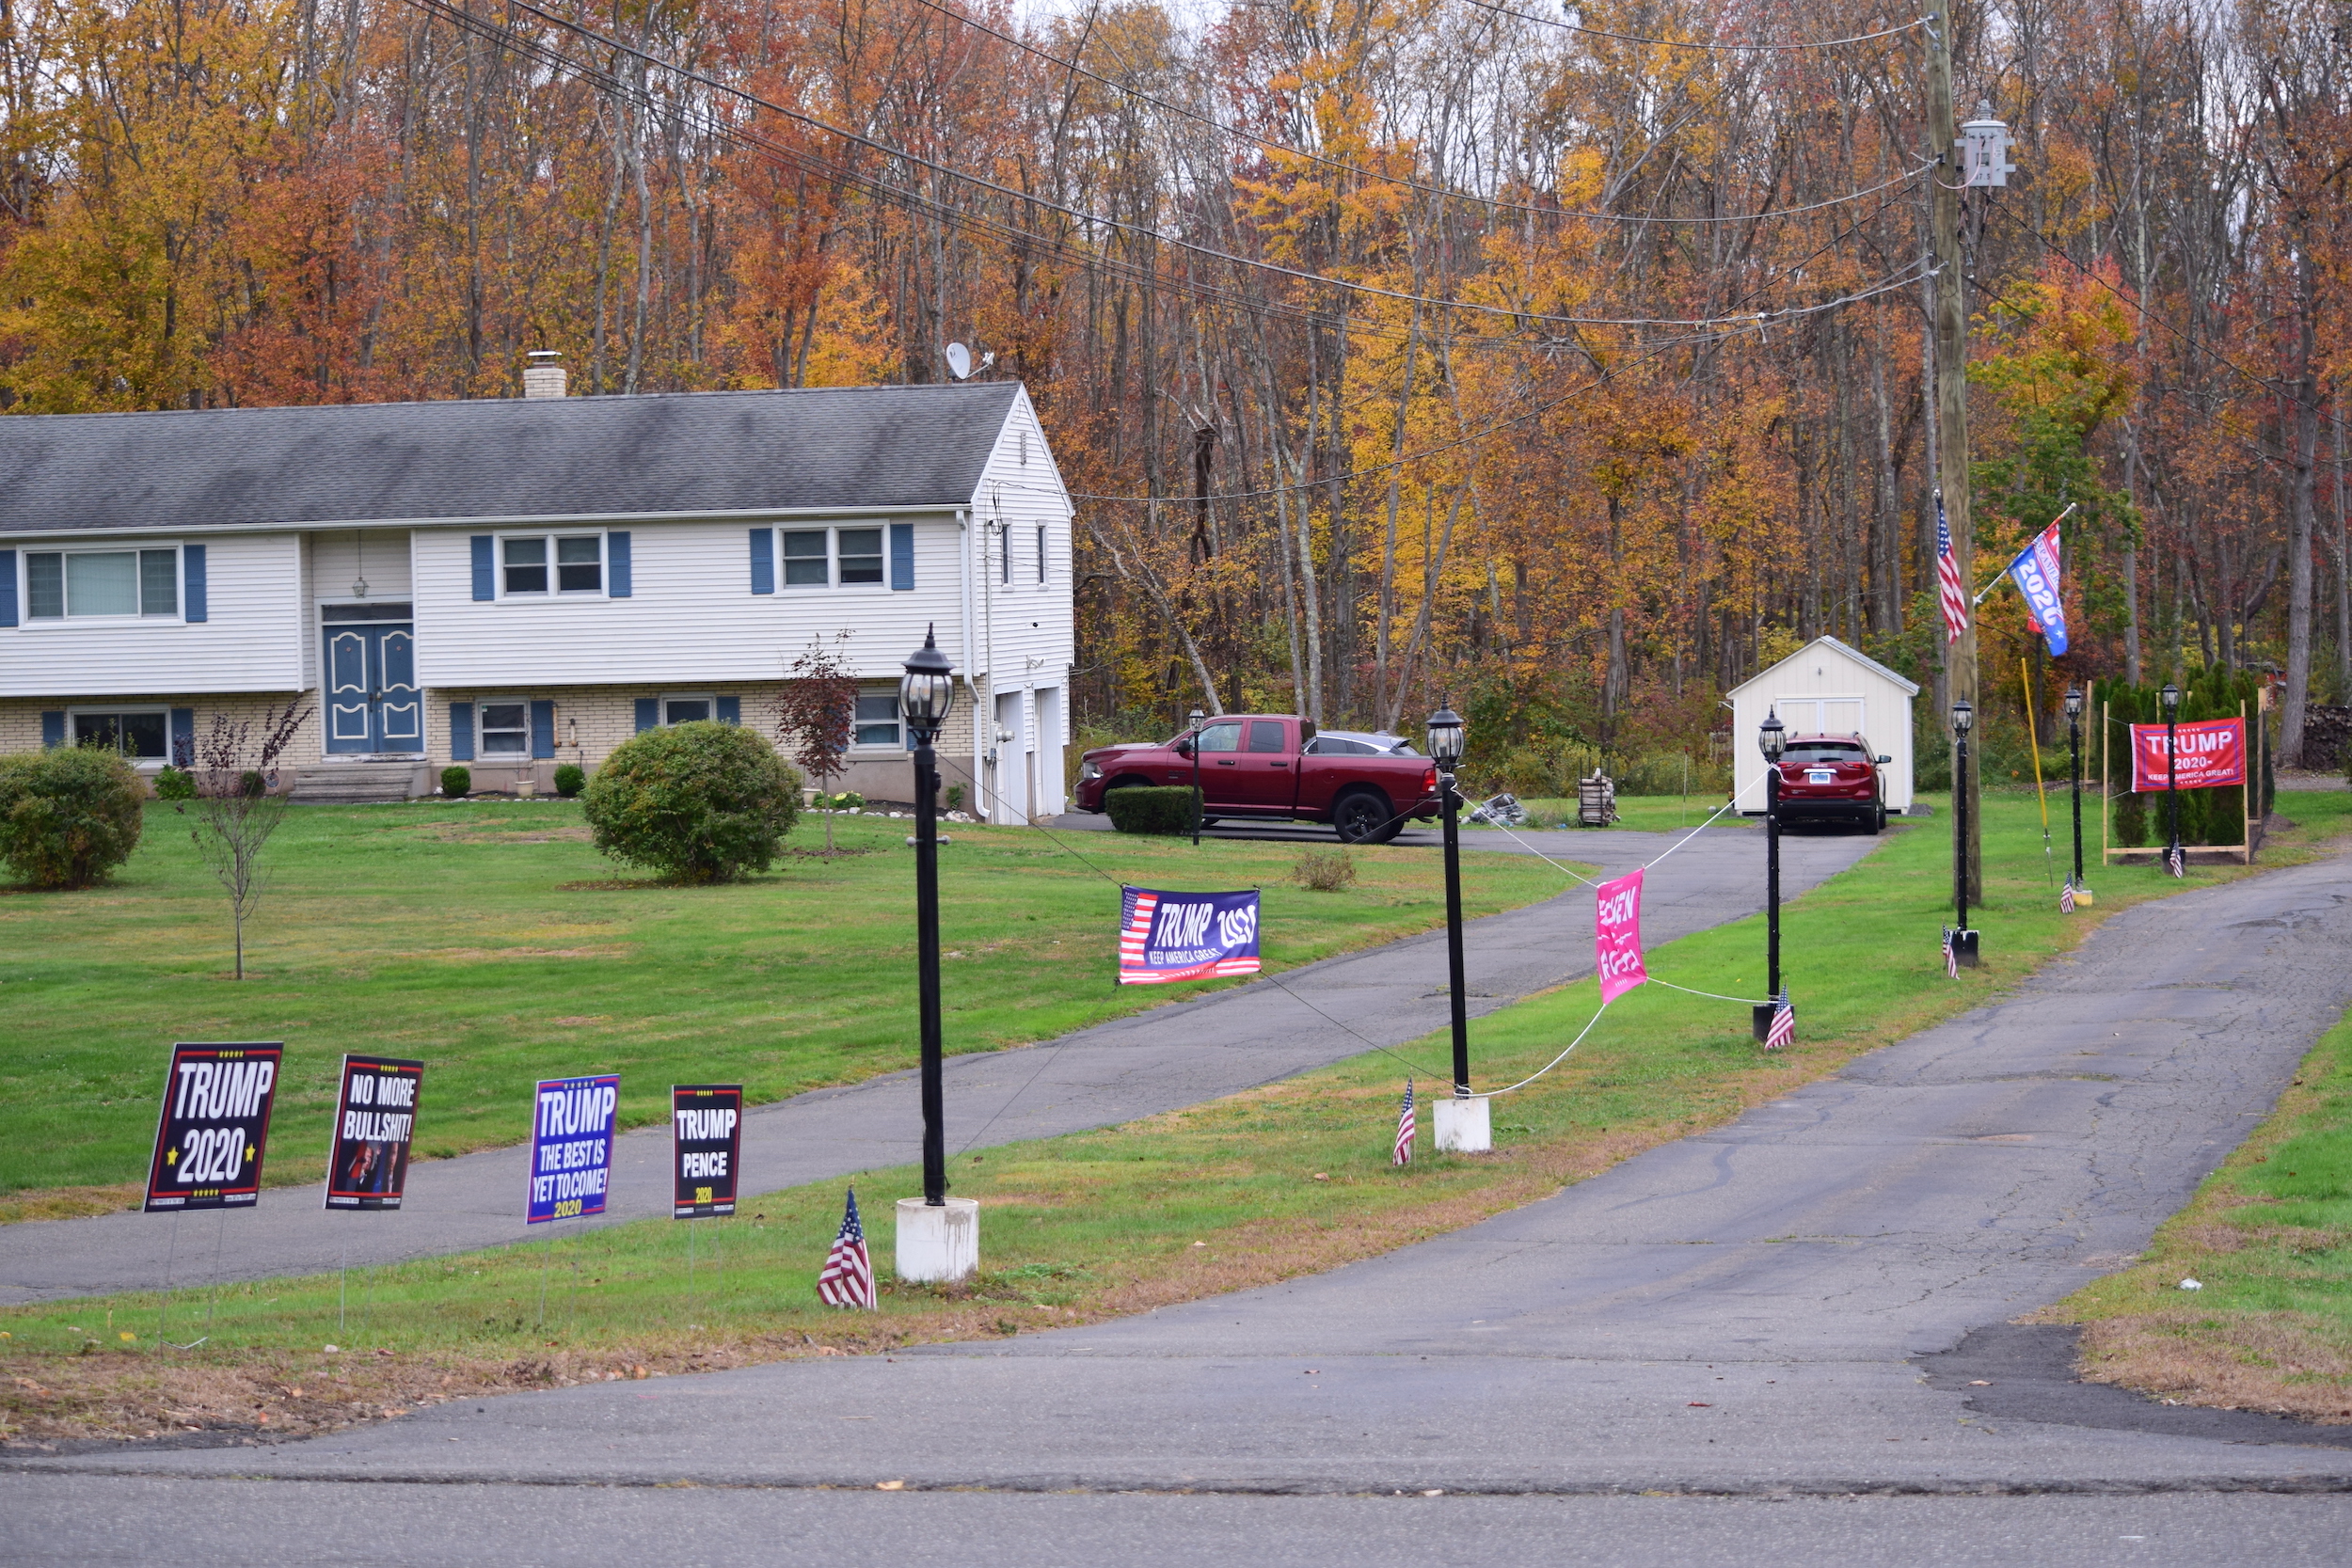 Signs for opposing political candidates are posted directly across the street from each other, causing tension throughout neighborhoods in Hamden. (photo by Jared Penna)